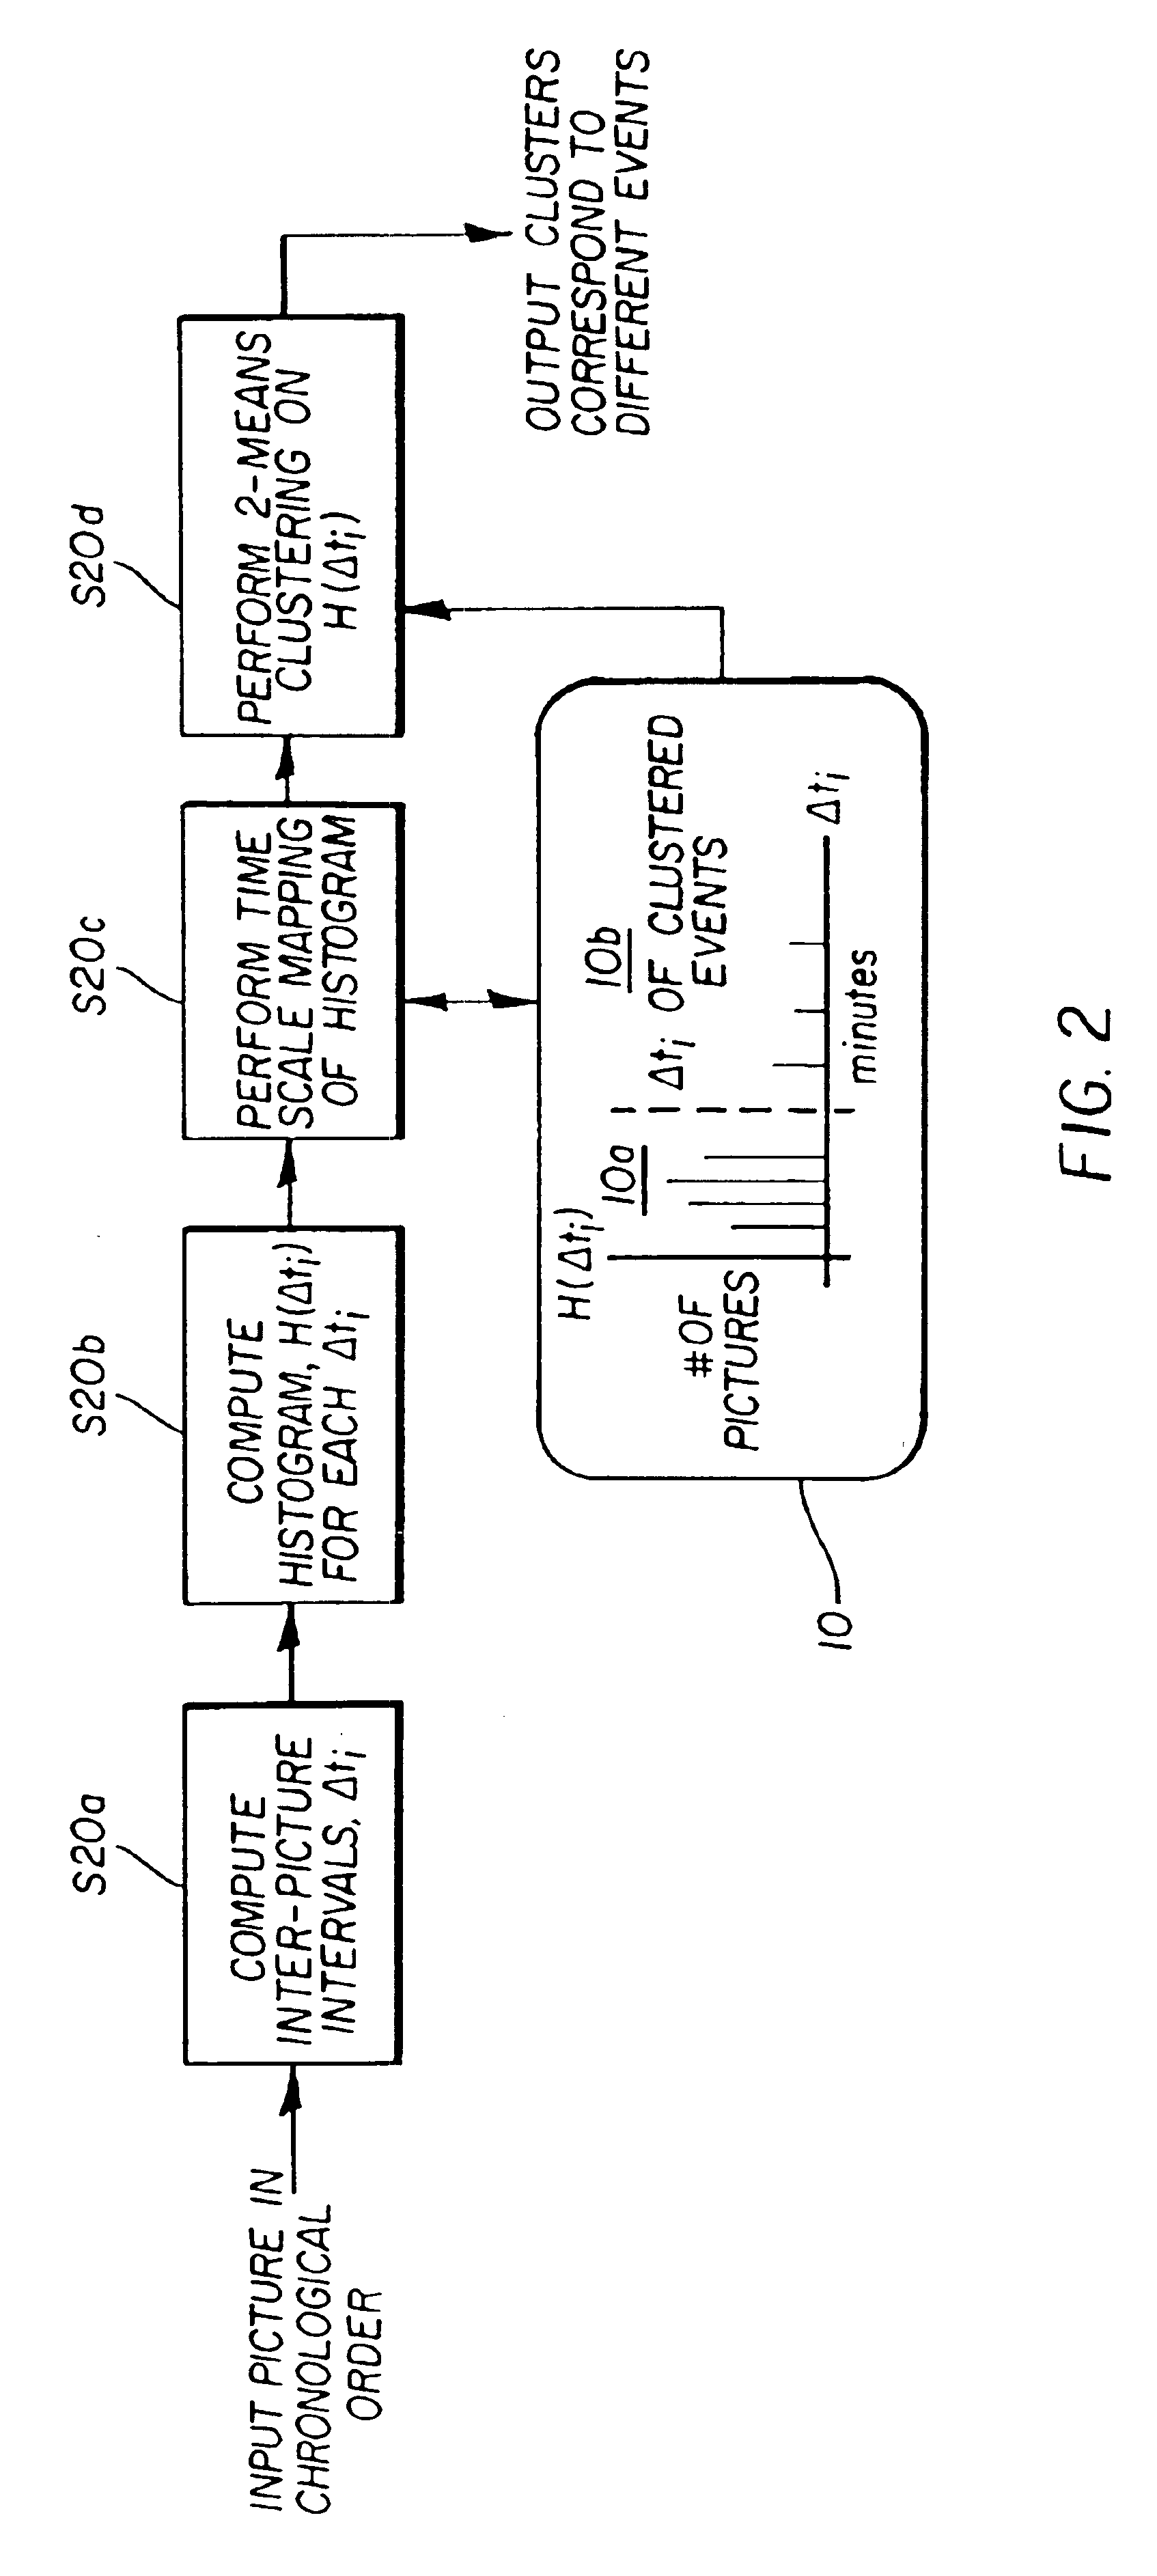 Method for automatically classifying images into events in a multimedia authoring application